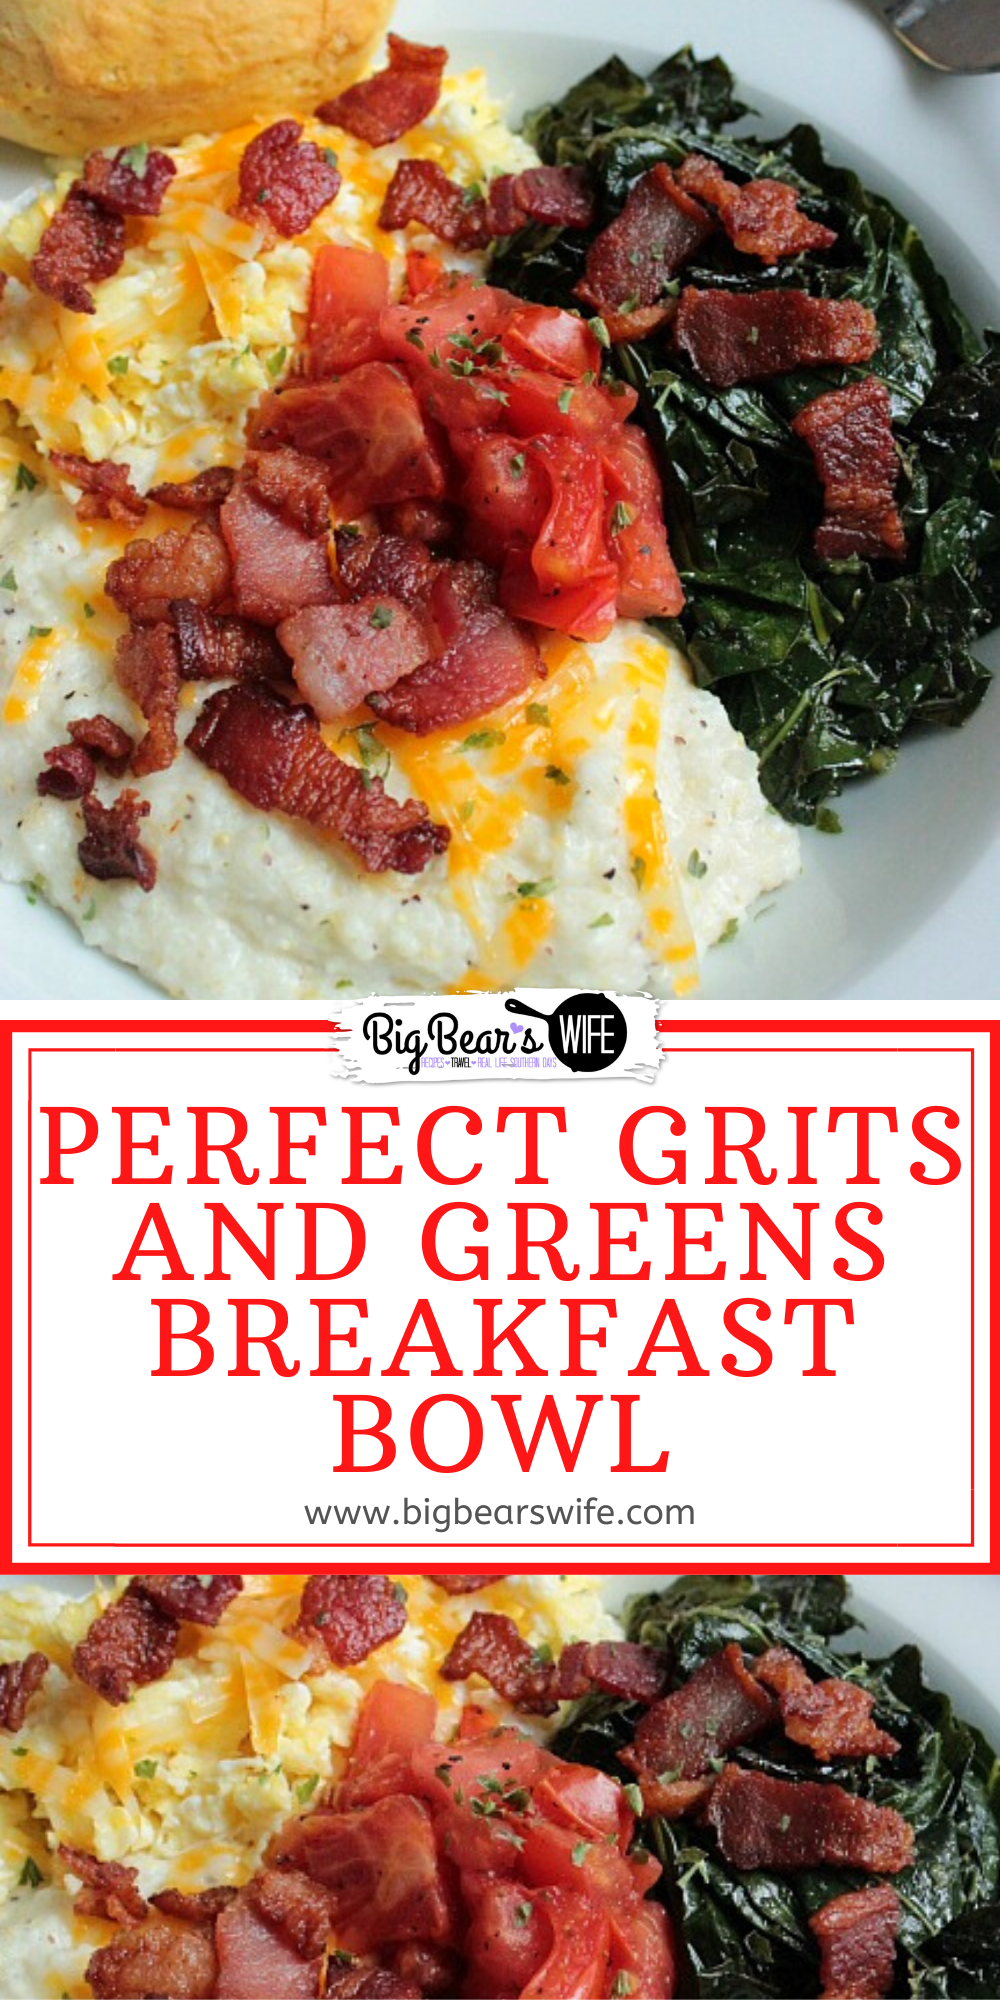 This Perfect Grits and Greens Breakfast Bowl is inspired by a brunch I had at The Corner Kitchen in Ashville, NC years ago! Eggs, Grits, collard greens topped with bacon bits and tomatoes are served with a biscuit for the perfect southern breakfast! via @bigbearswife